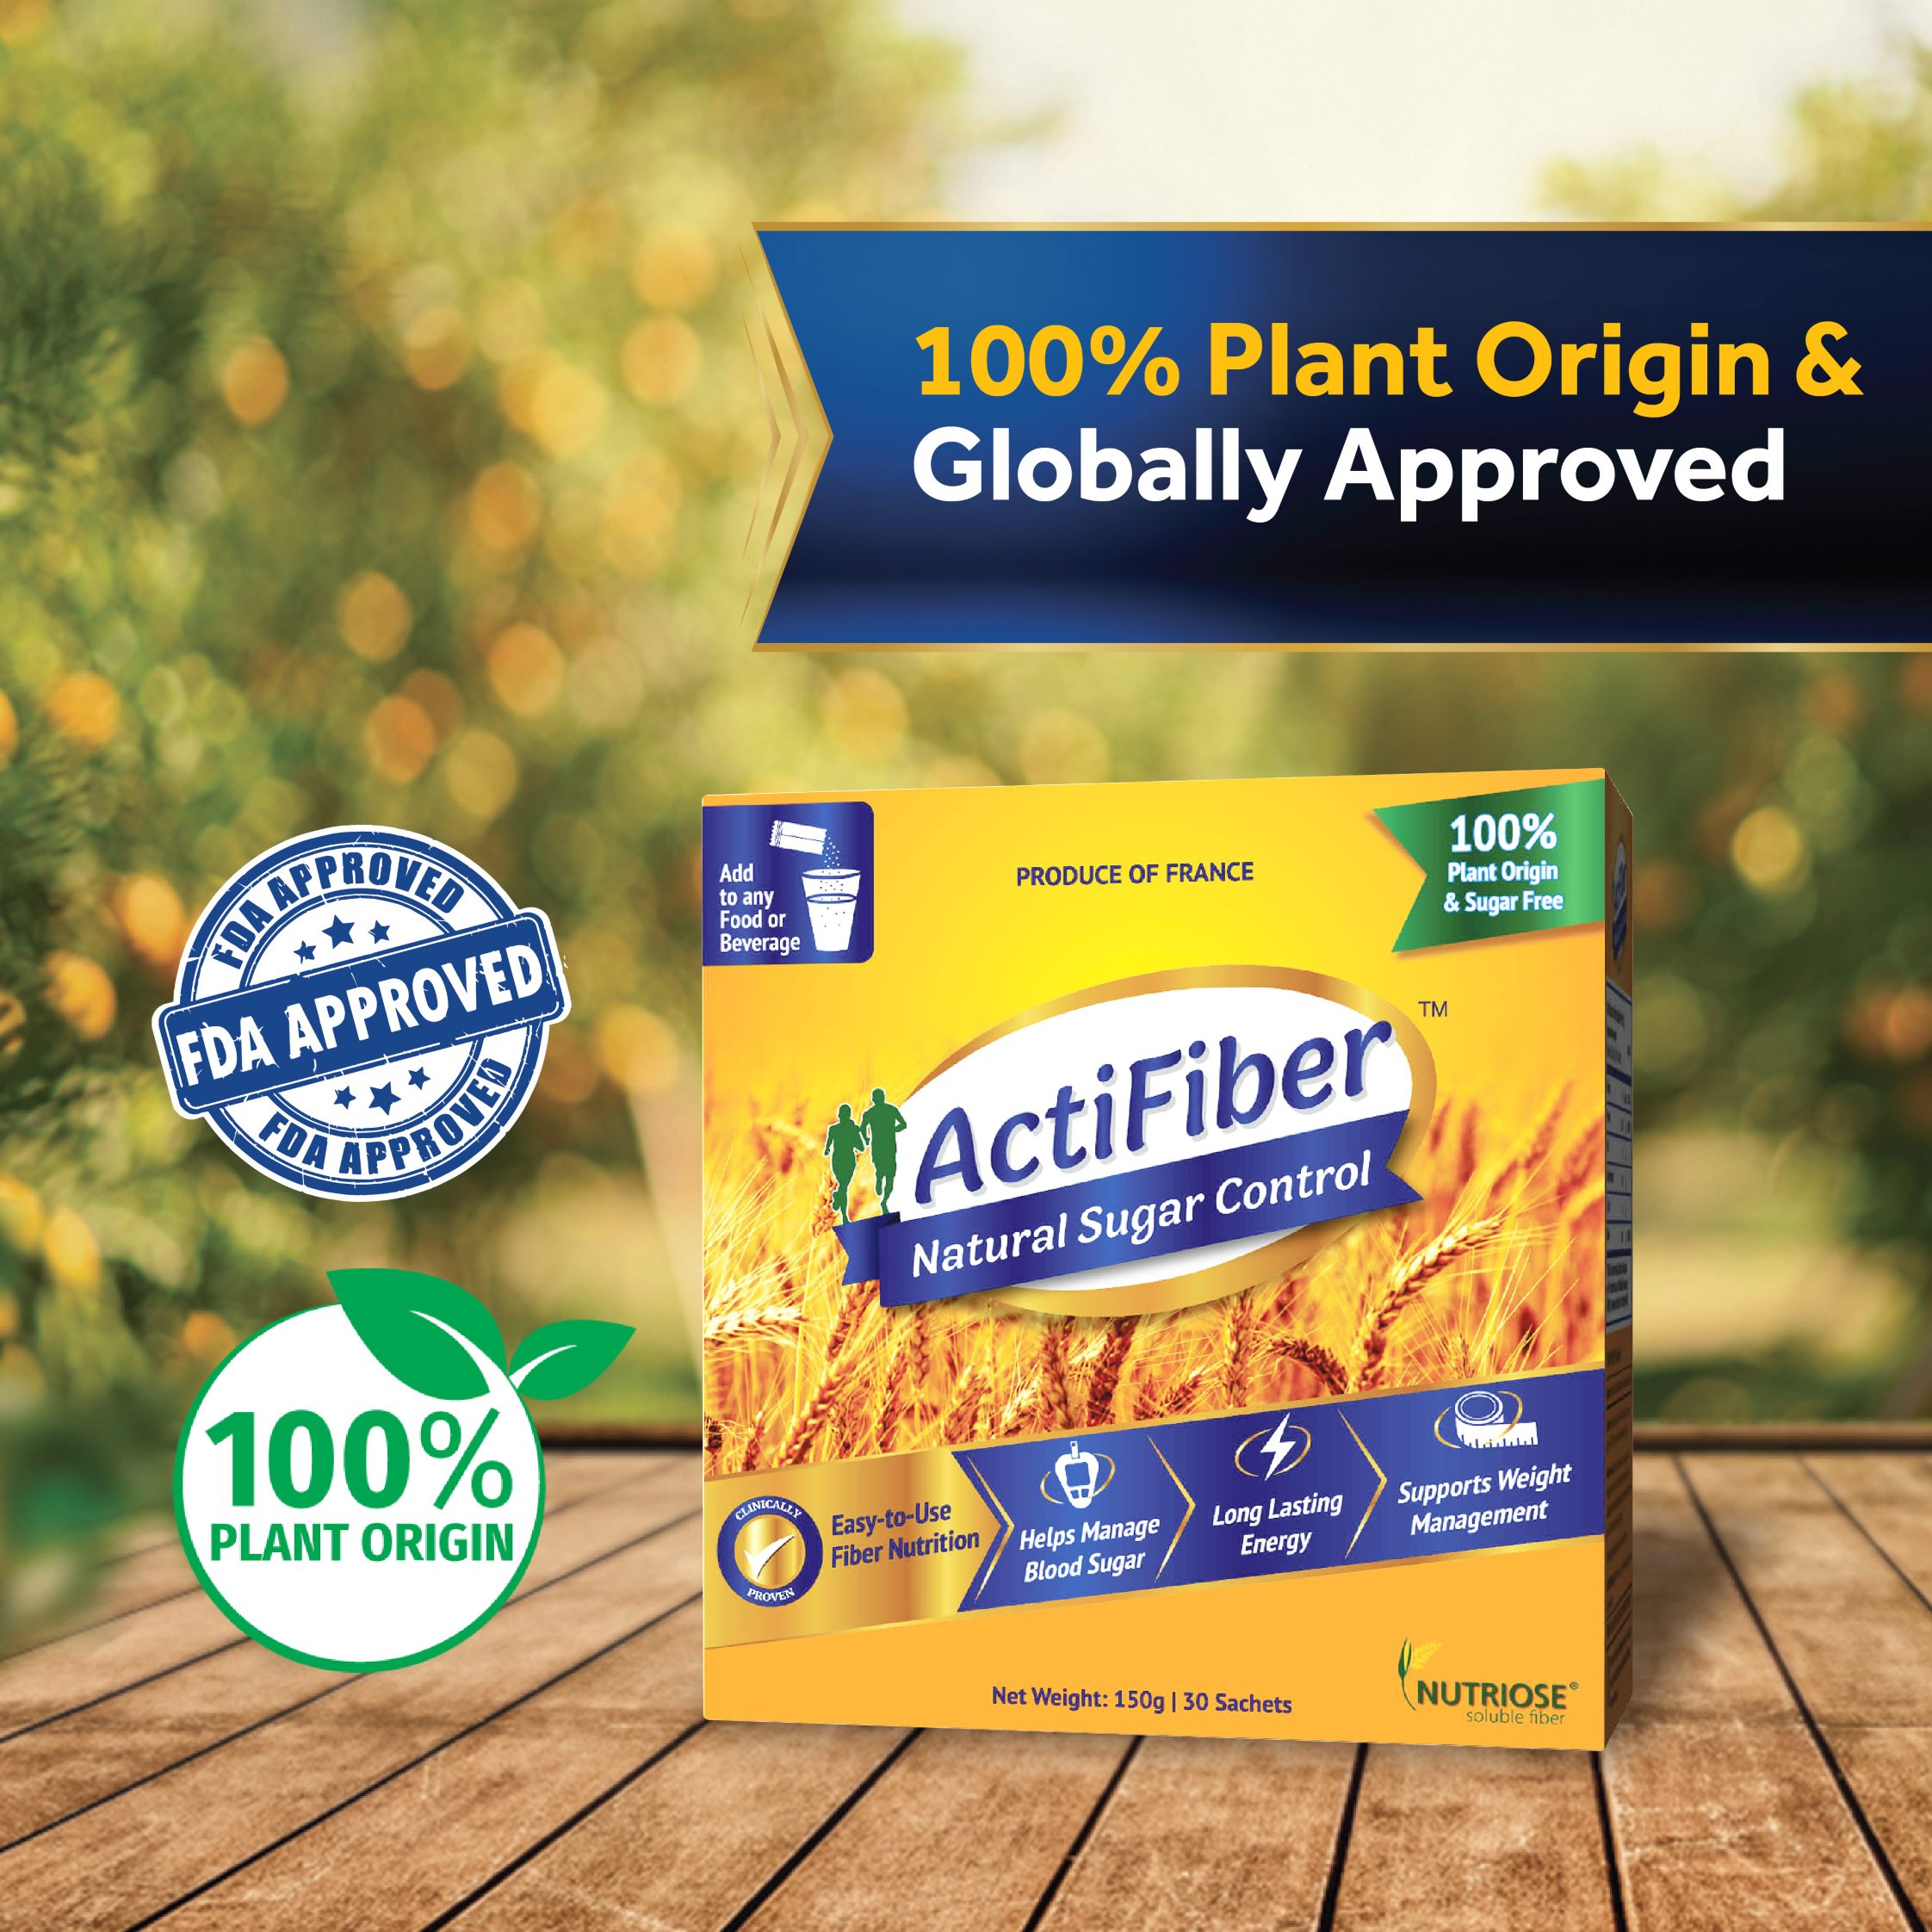 ActiFiber Natural Sugar Control | Diabetes Food Product | Better Control of Blood Sugar Fluctuations in 4 weeks | Better Diabetes Control | Natural & Safe | Recommended by Nutrition Experts  | Clinically Proven Health Benefits